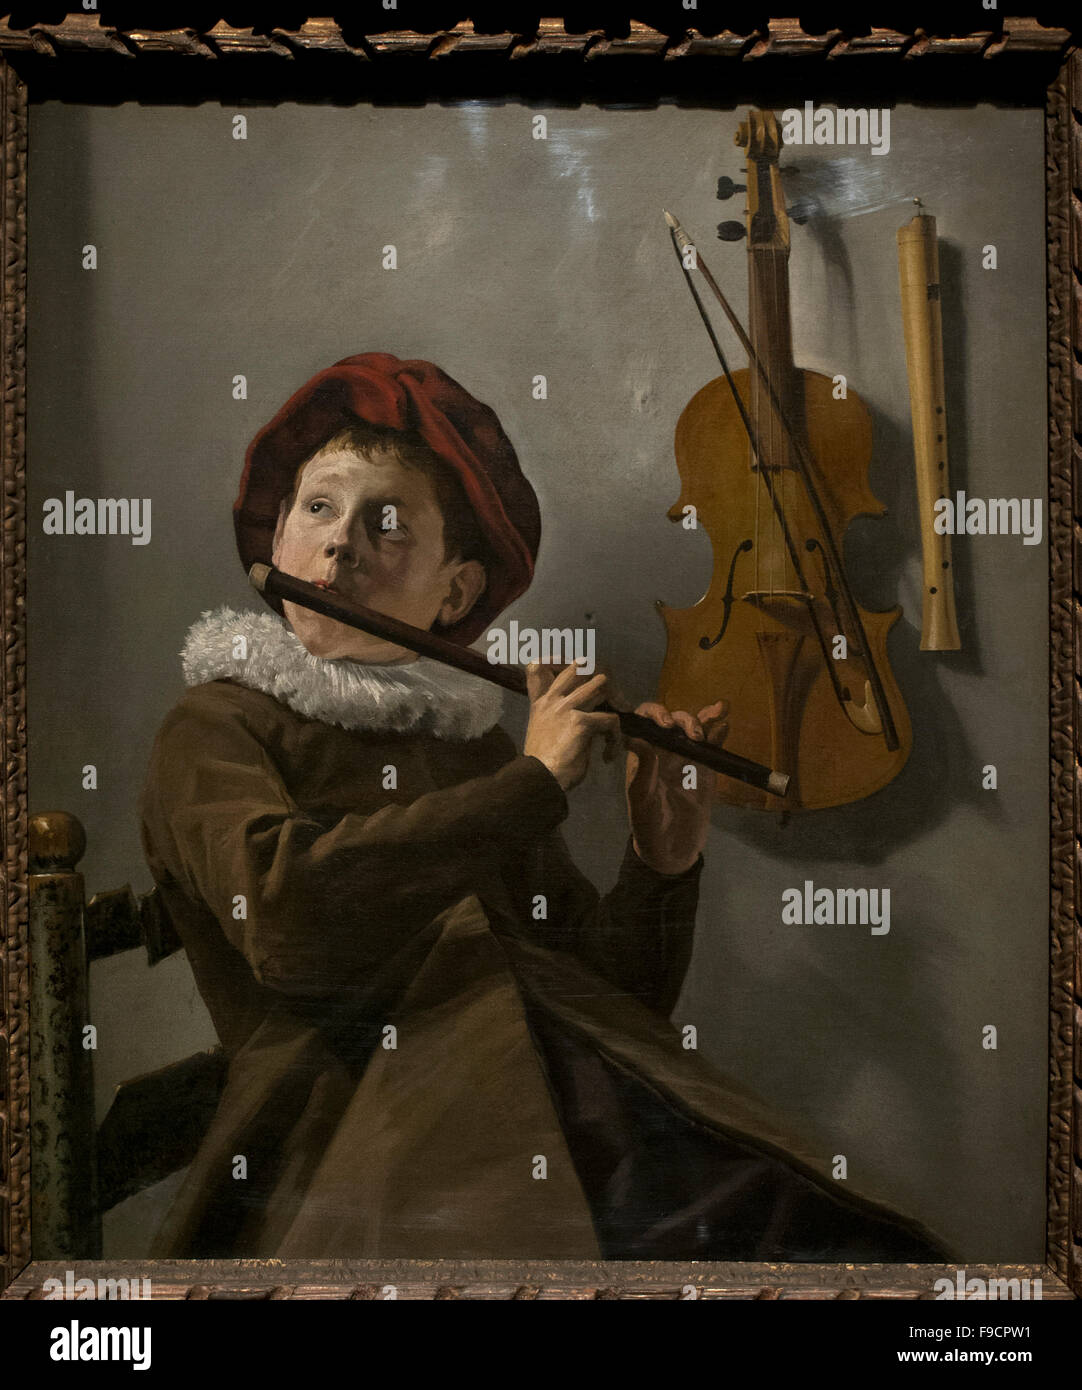 Judith Leyster (1609-1660). Dutch painter. Boy Playing a Flute, 1630s. National Museum. Stockholm. Sweden. Stock Photo